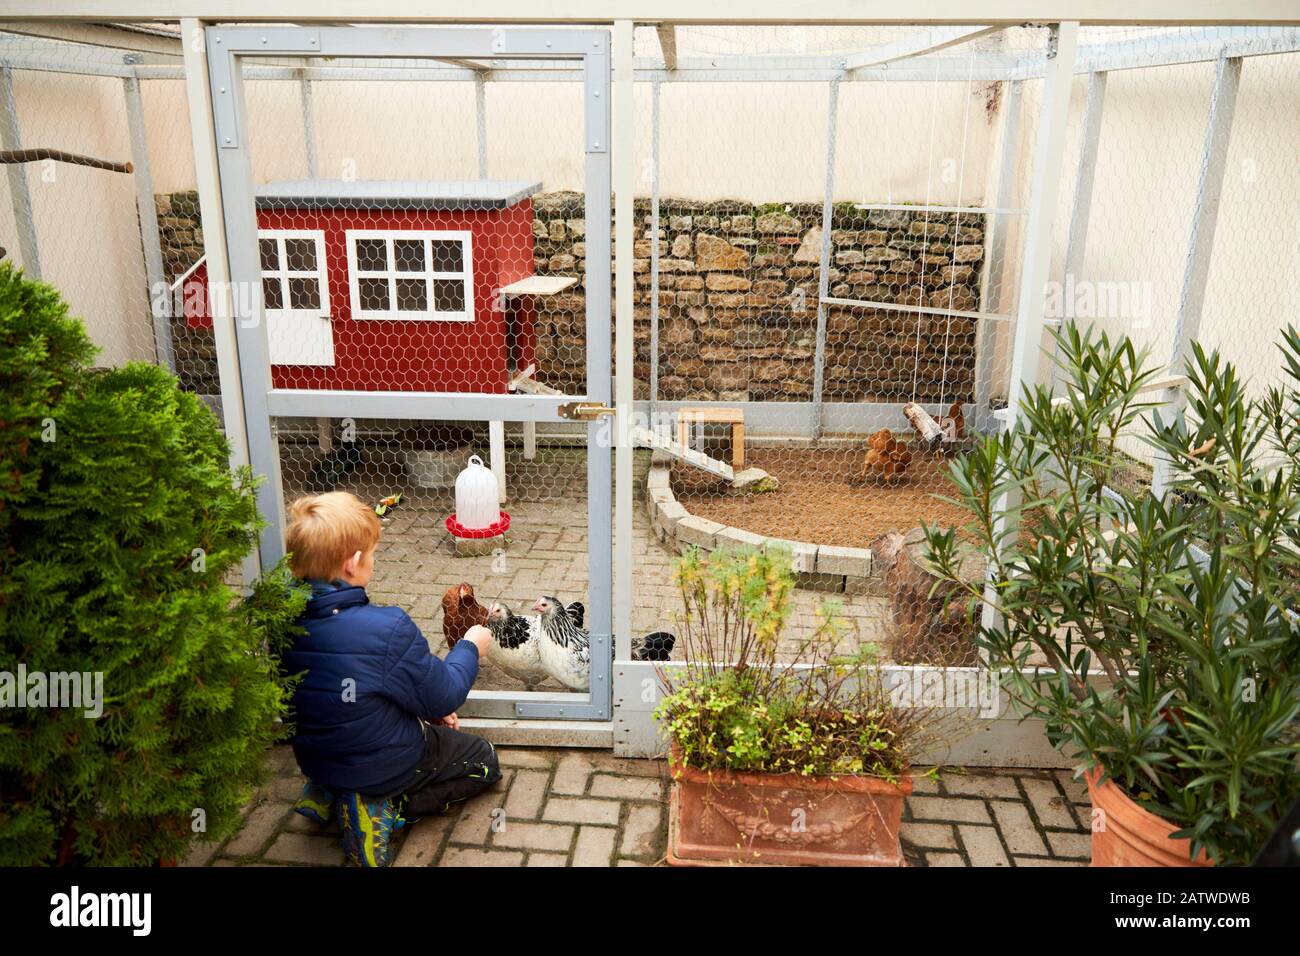 Domestic chicken. Hen house with chicken-run in a courtyard. Germany Stock Photo